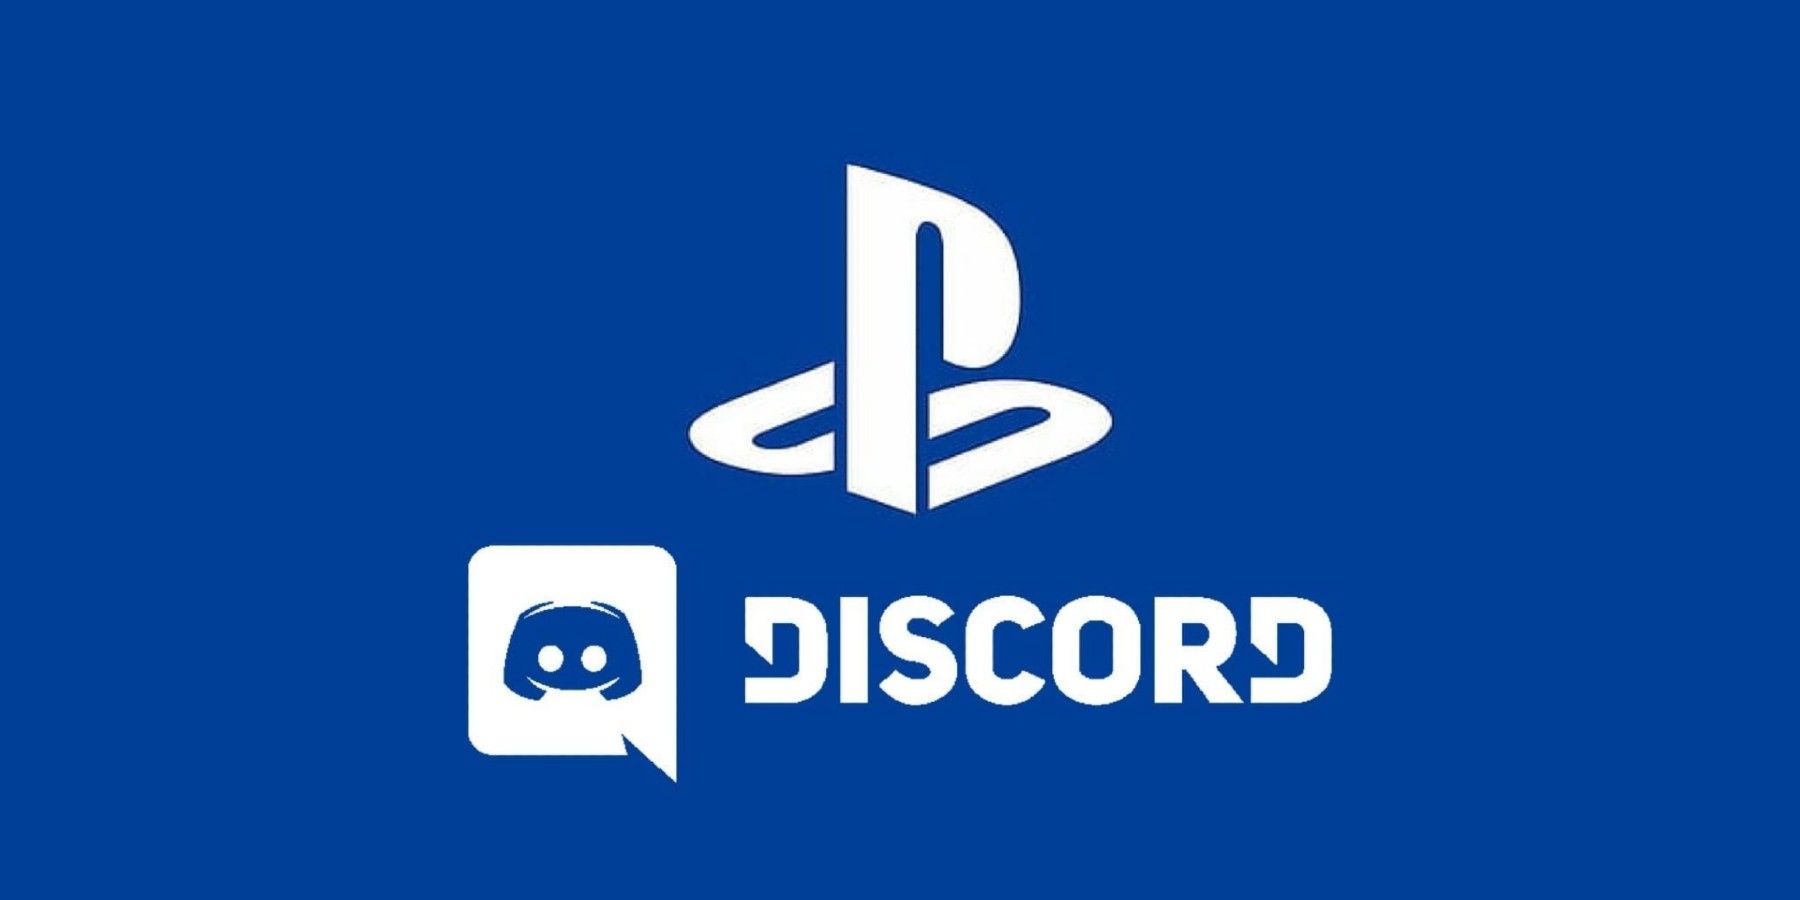 Playstation Owners Can Link Their Discord Accounts Starting Today